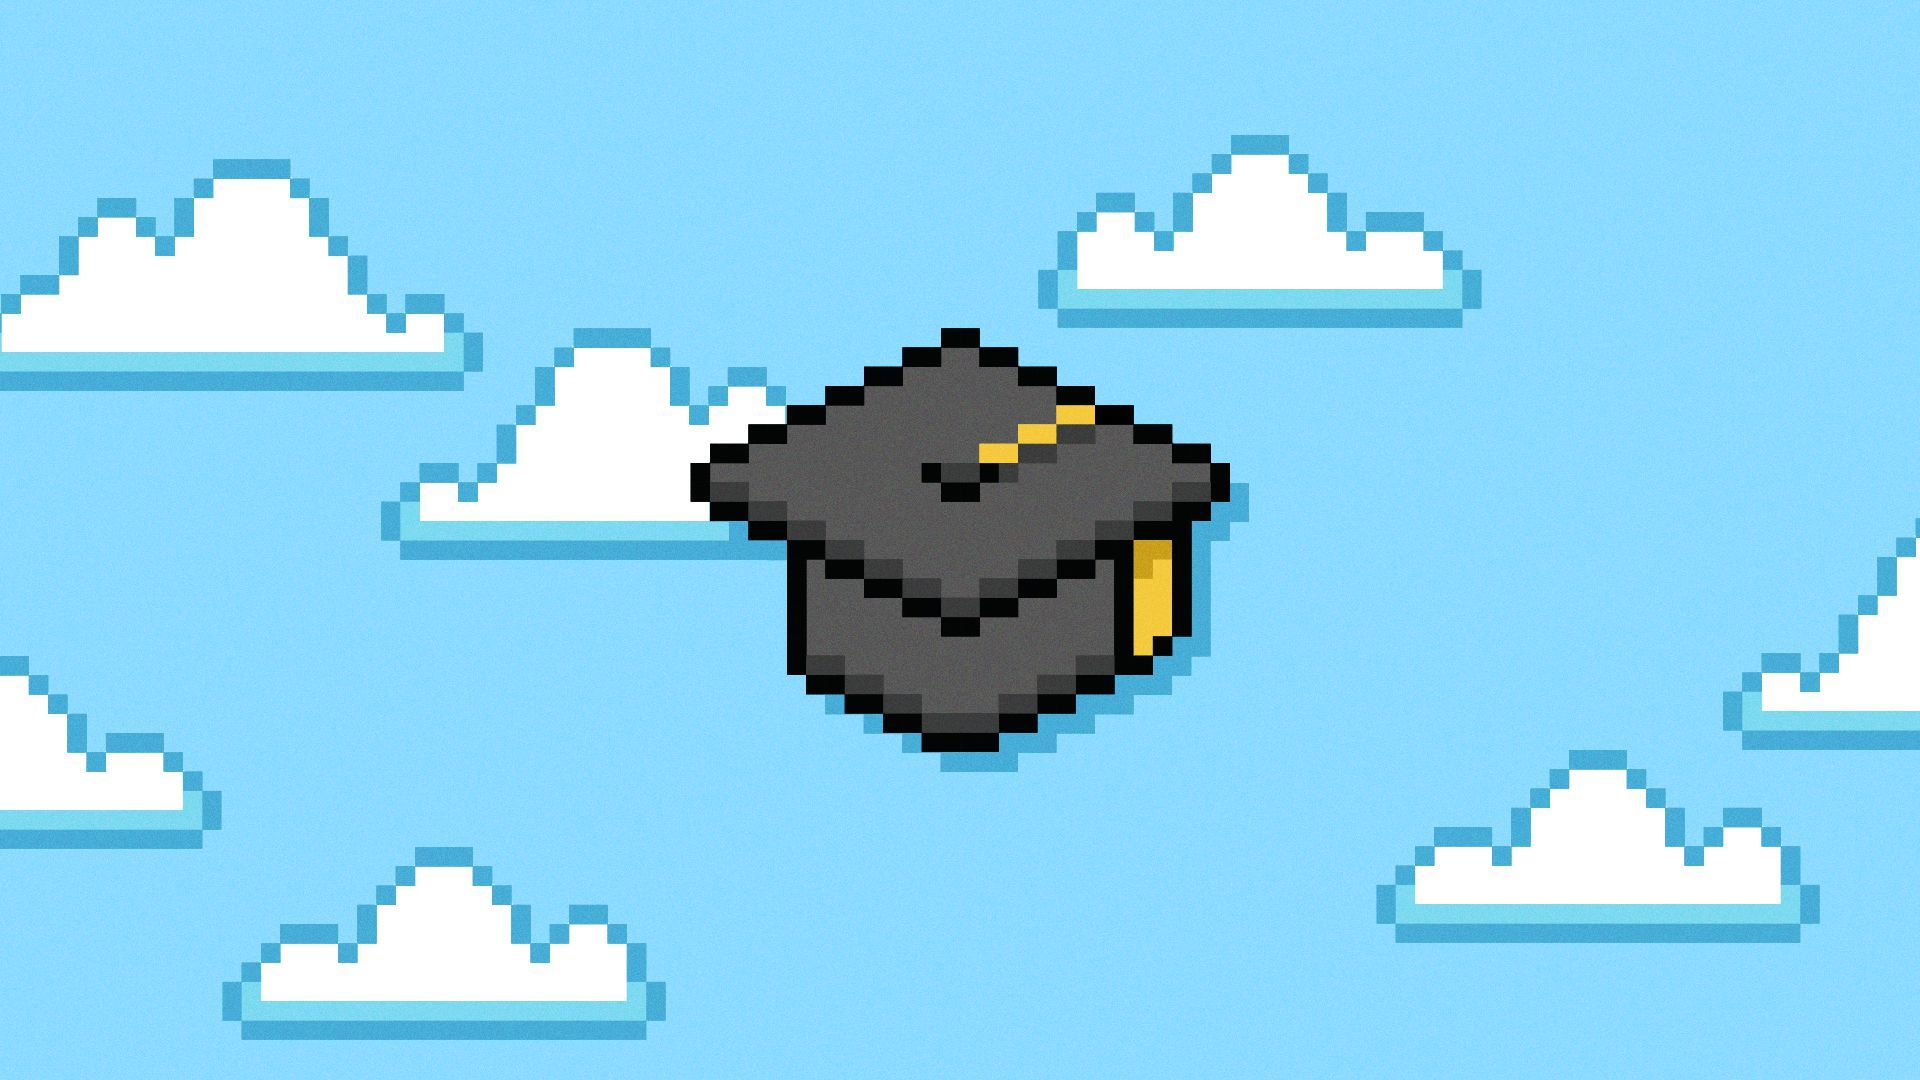 Illustration of an 8-bit graduation cap against a background with clouds.